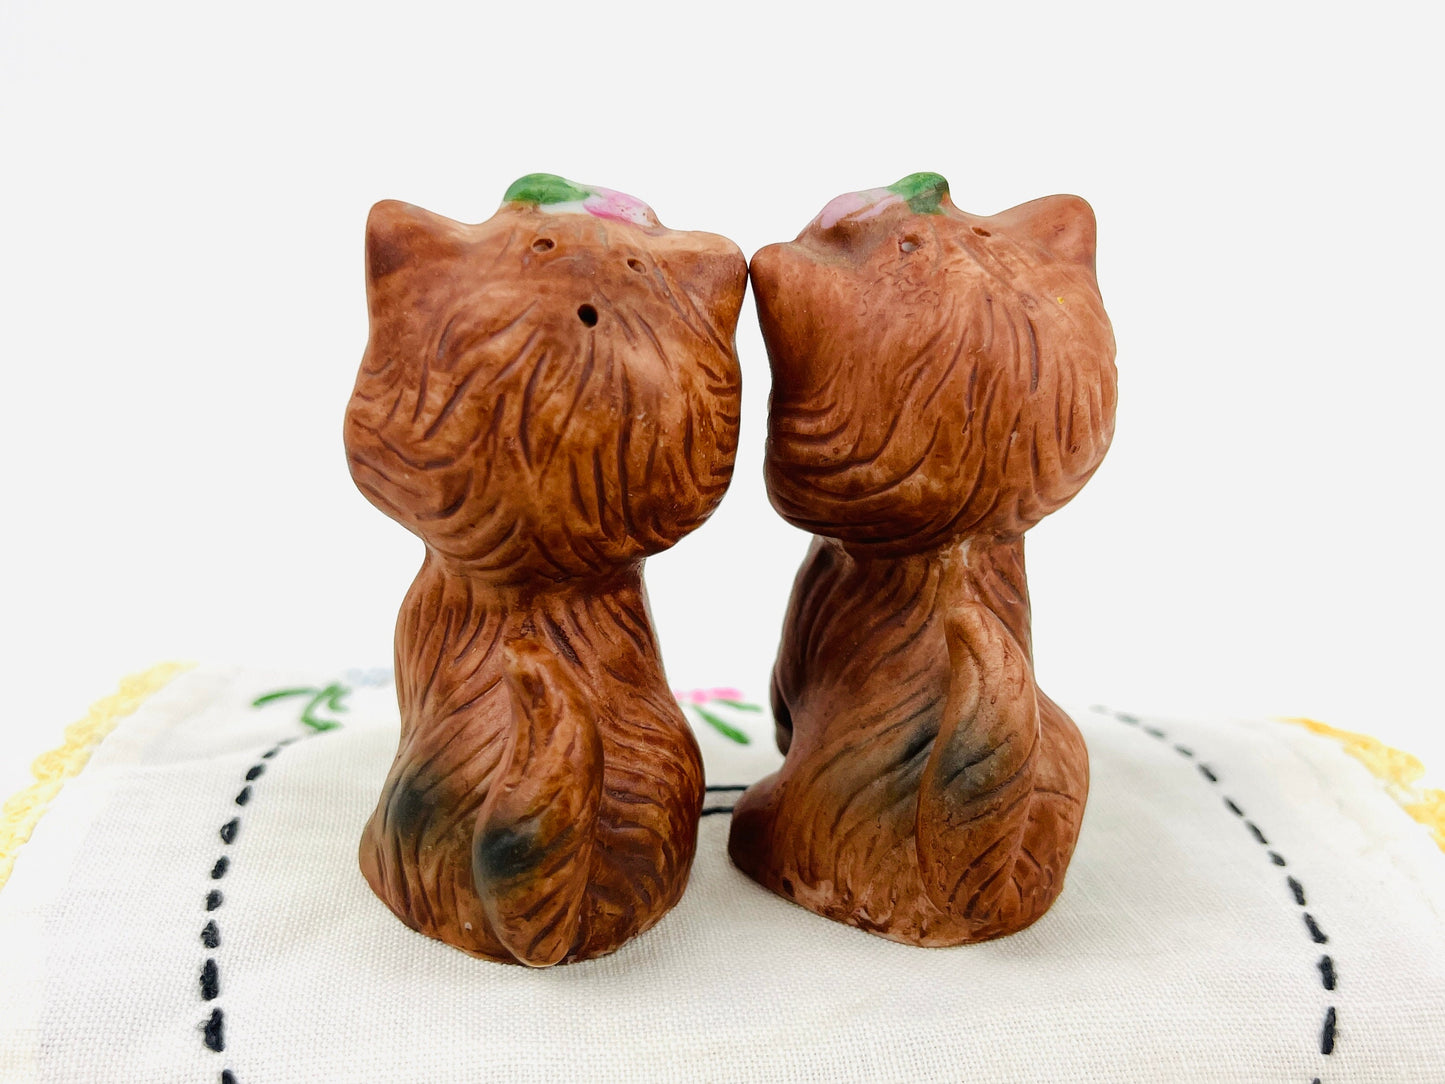 Vintage Anthropomorphic Kittens Kitschy Salt and Pepper Shakers Set of 2 Brown Kitty Cat Figurines